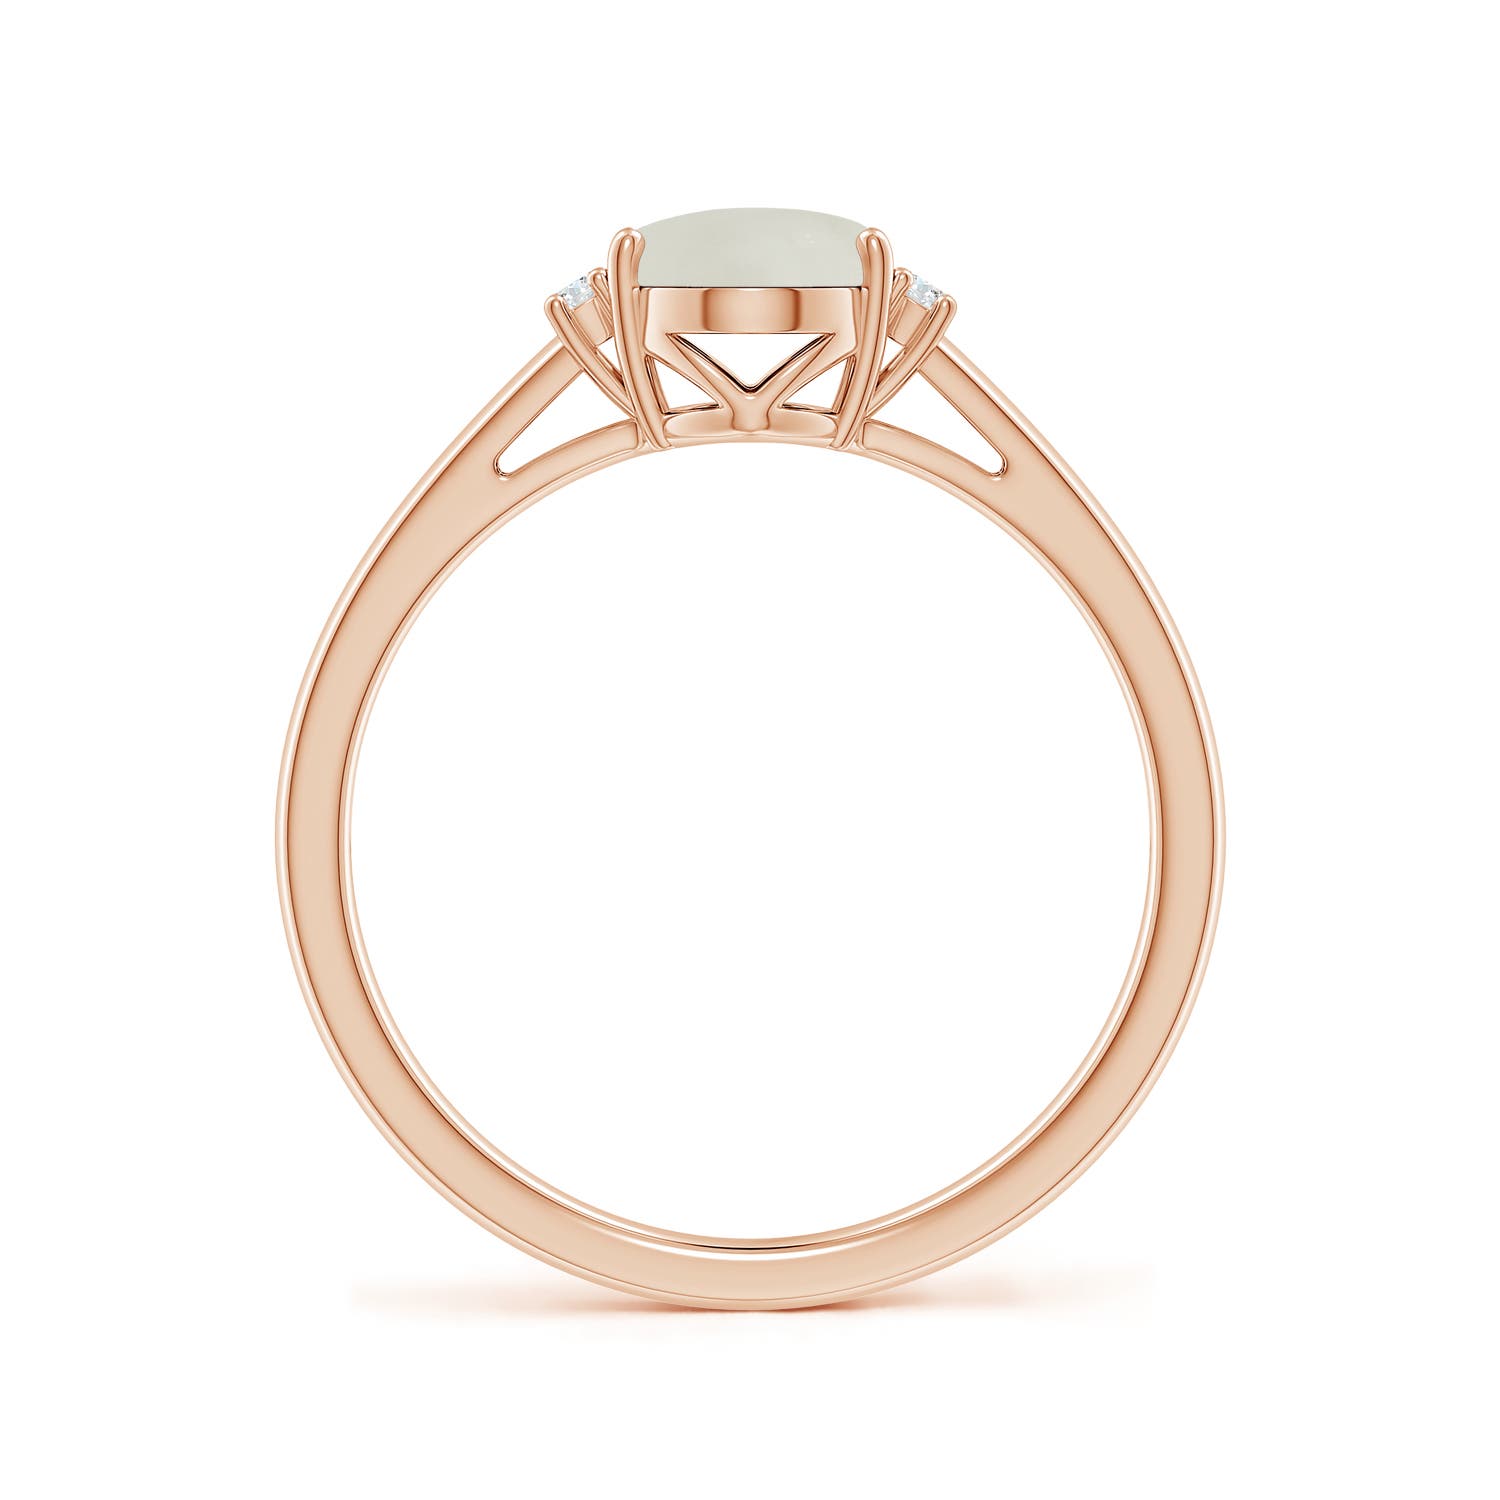 AAA - Moonstone / 1.17 CT / 14 KT Rose Gold